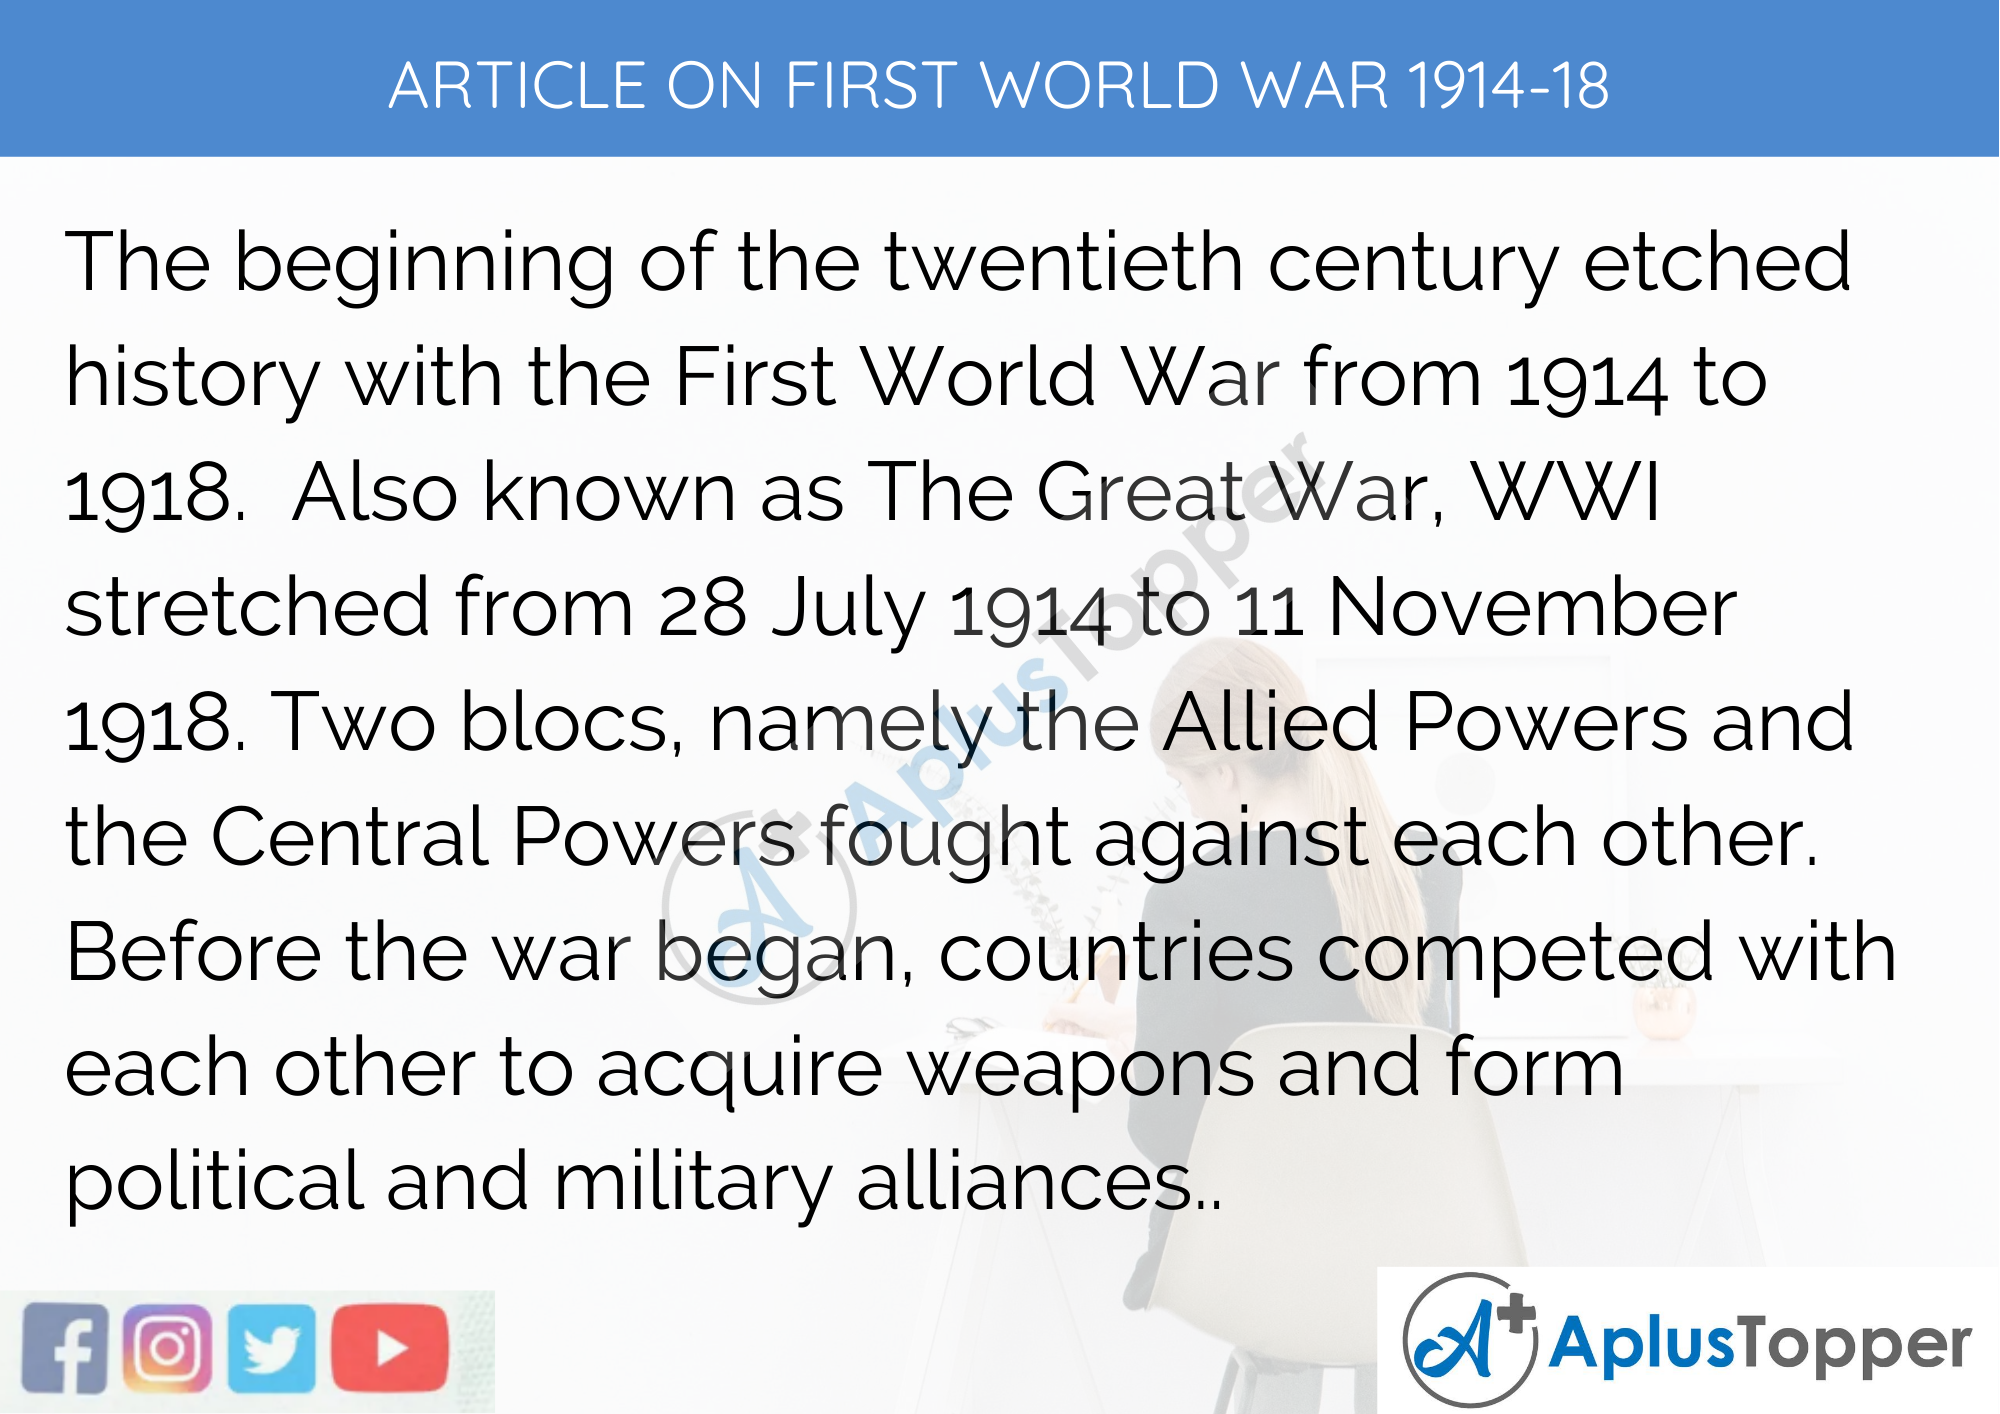  Short Article on First World War 1914-18 in English 200 Words